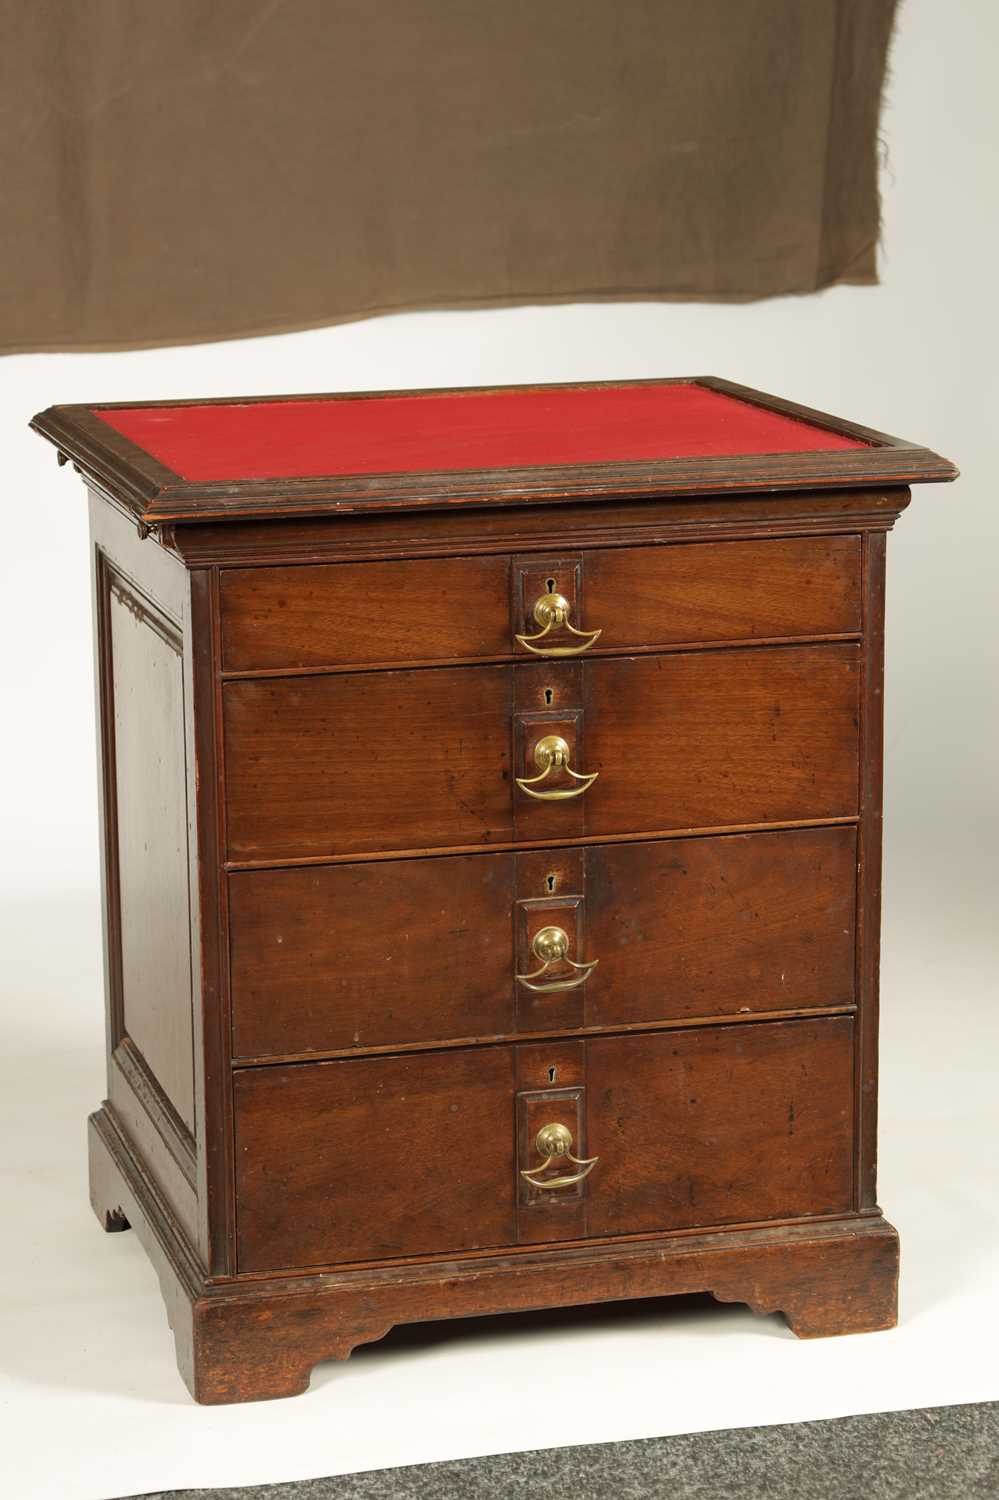 AN UNUSUAL LATE 19TH CENTURY WALNUT SMALL CHEST OF DRAWERS BY E. WALKER CABINETMAKER AND DATED 1893 - Image 3 of 7